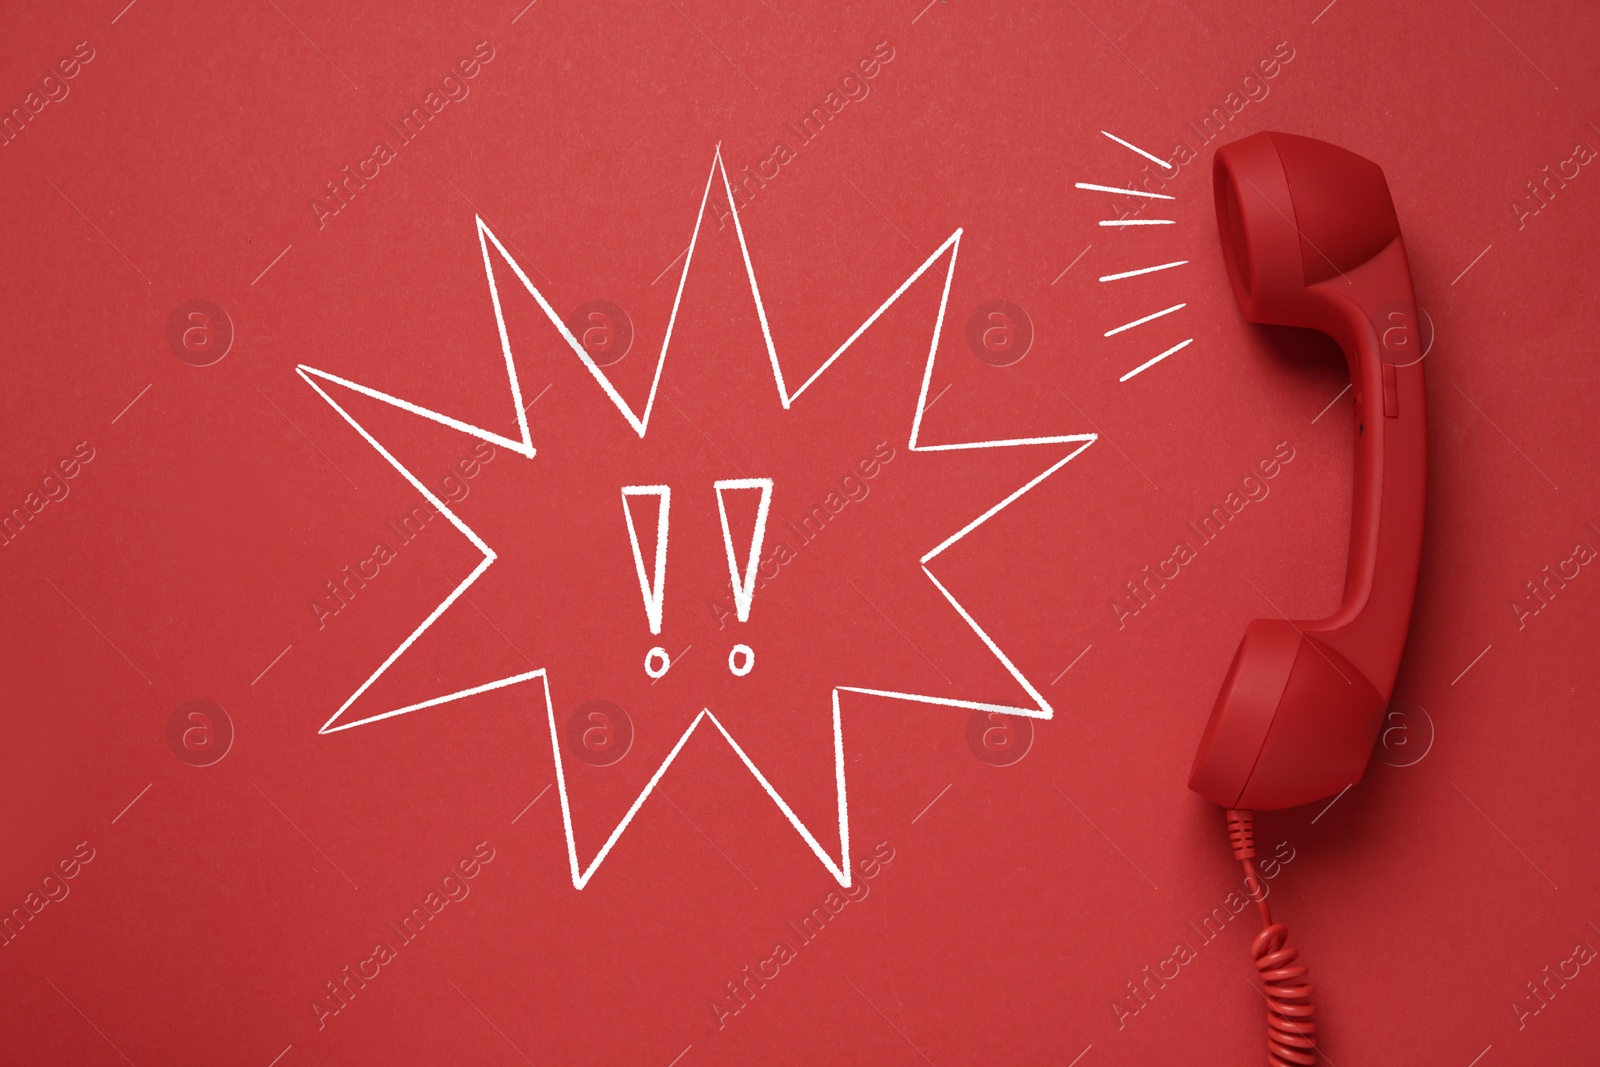 Image of Complaint. Corded telephone handset and illustration on red background, top view